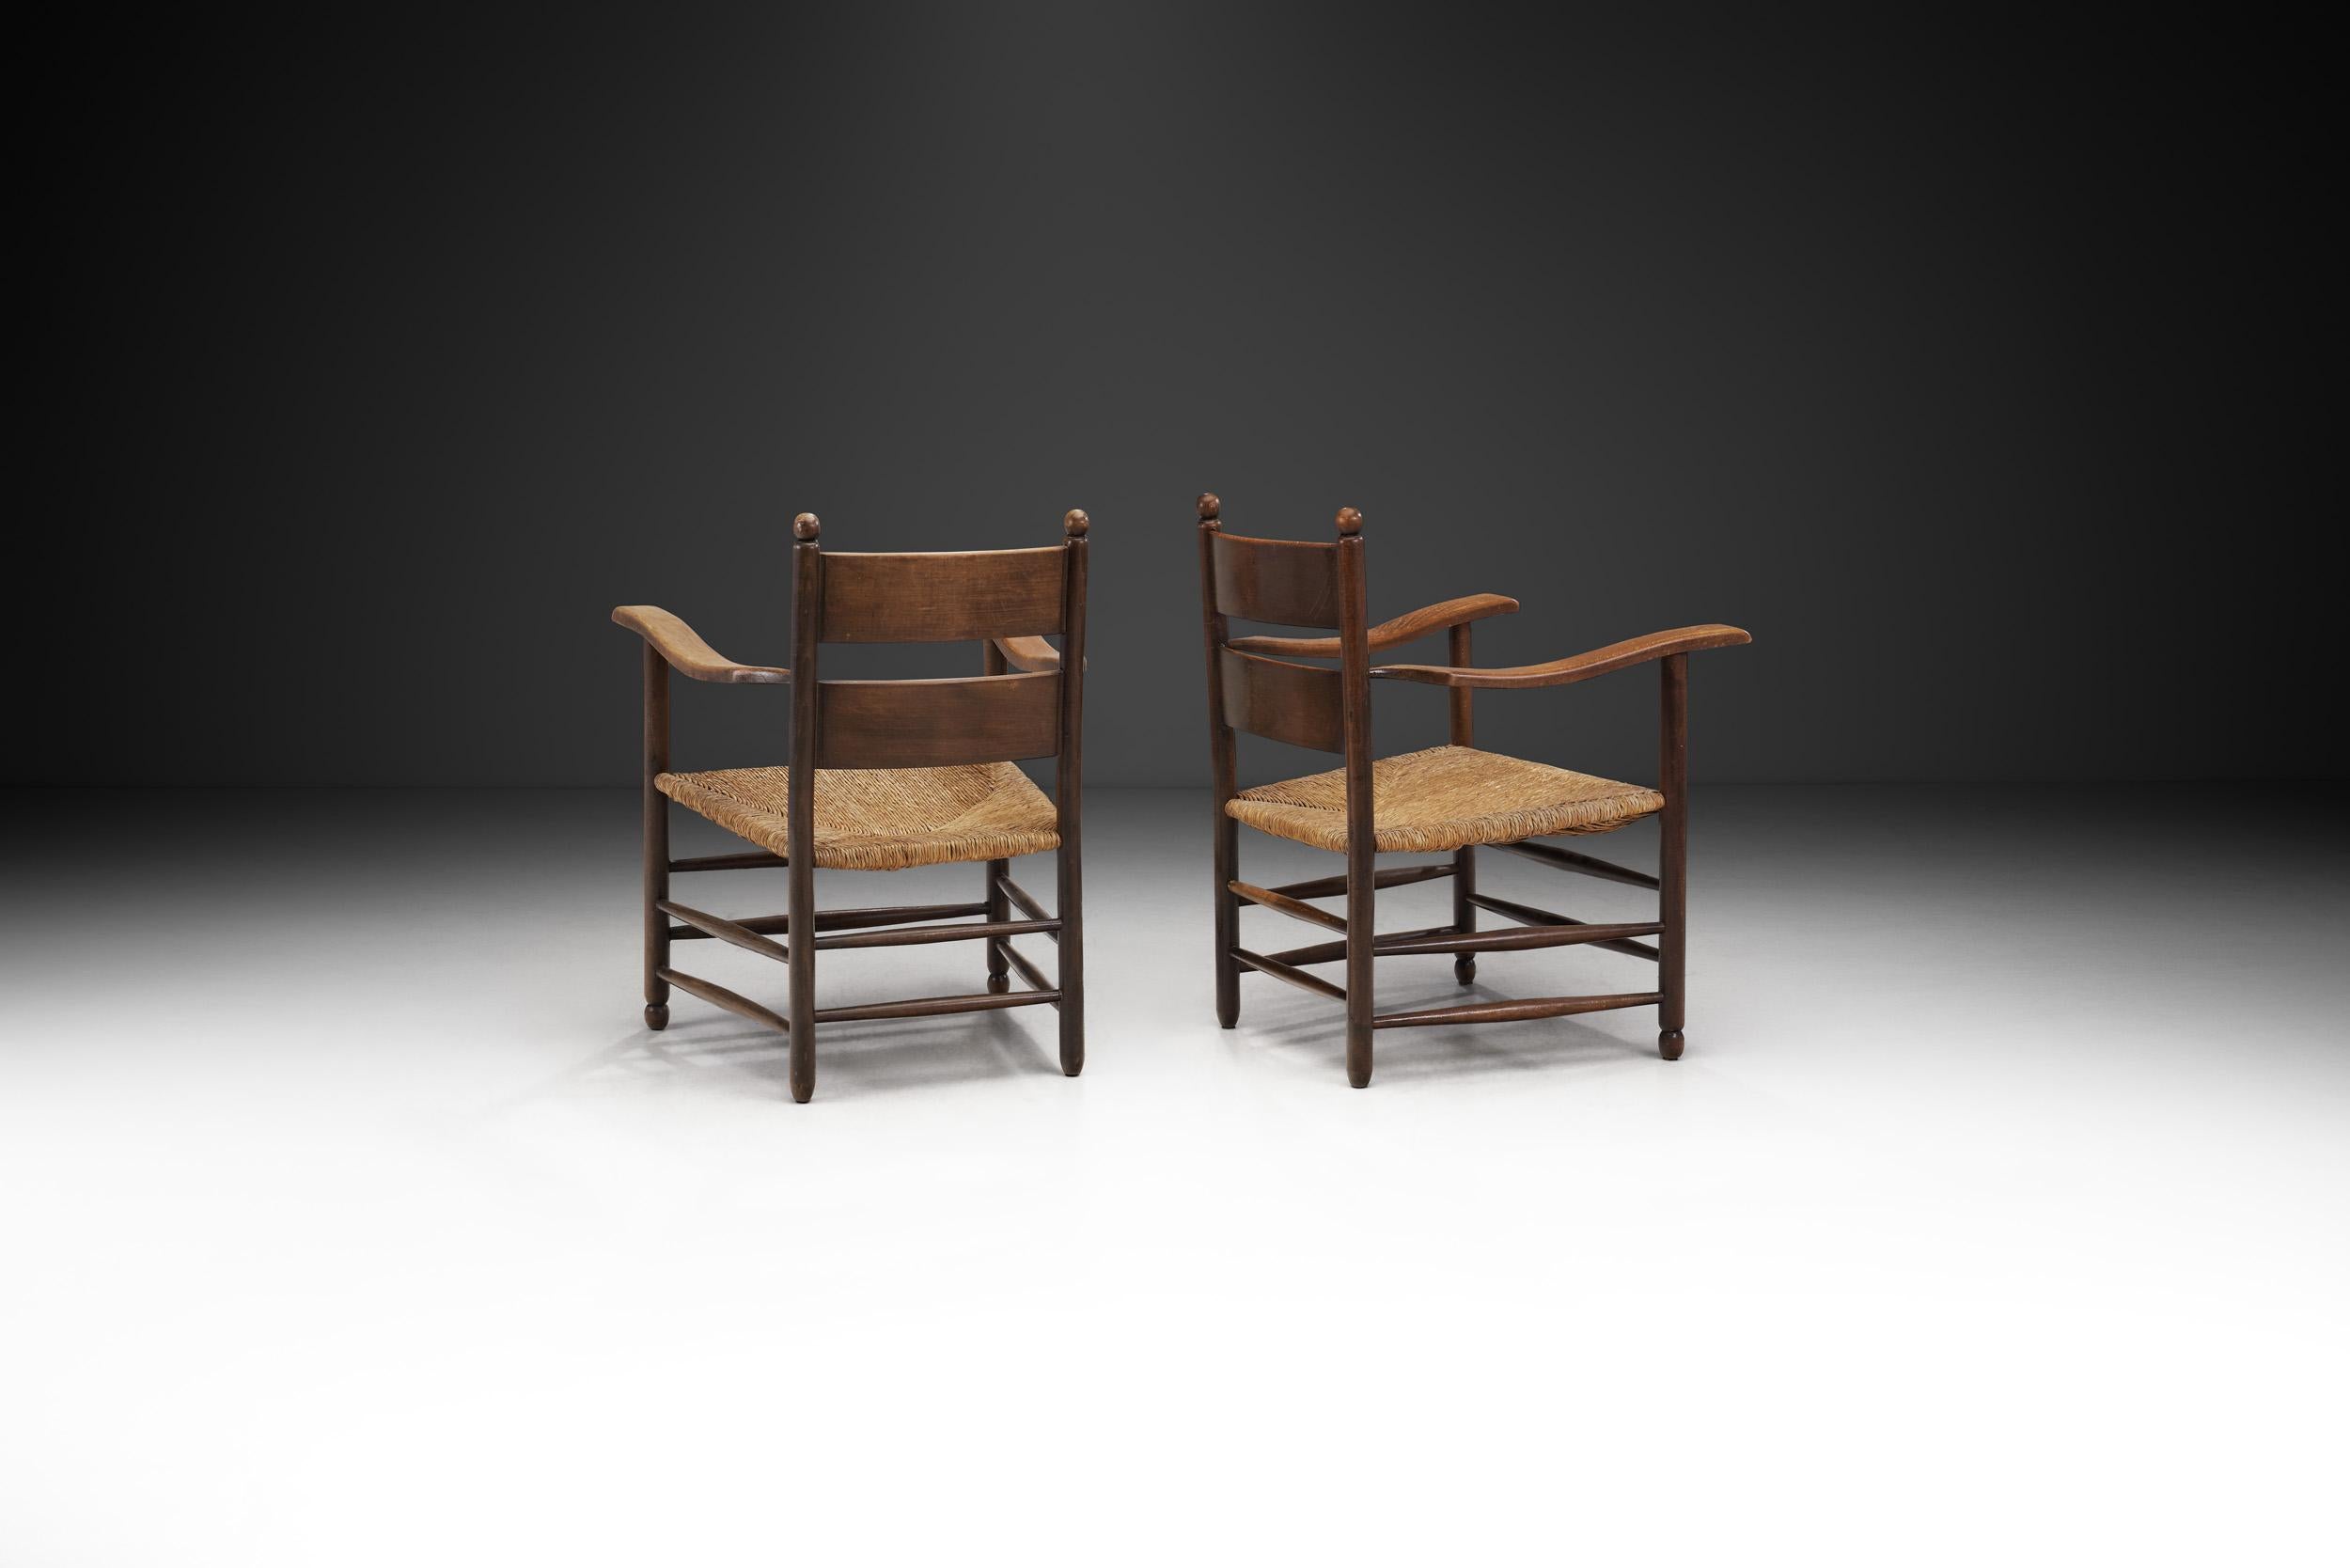 Mid-20th Century European Modernist Oak and Straw Armchairs, Europe, 1960s For Sale